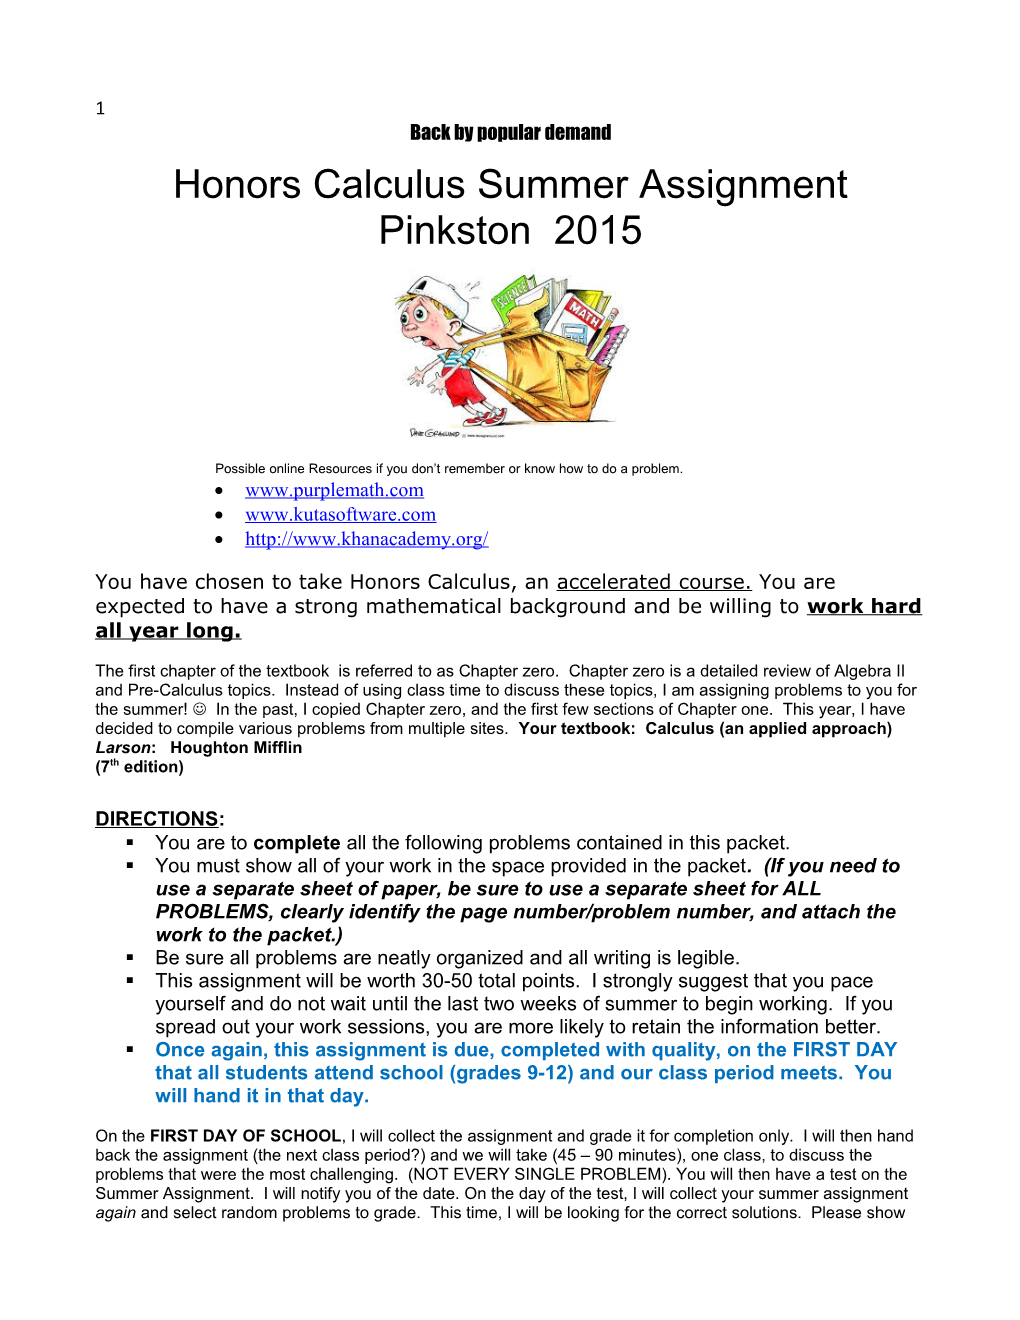 Honors Calculus Summer Assignment